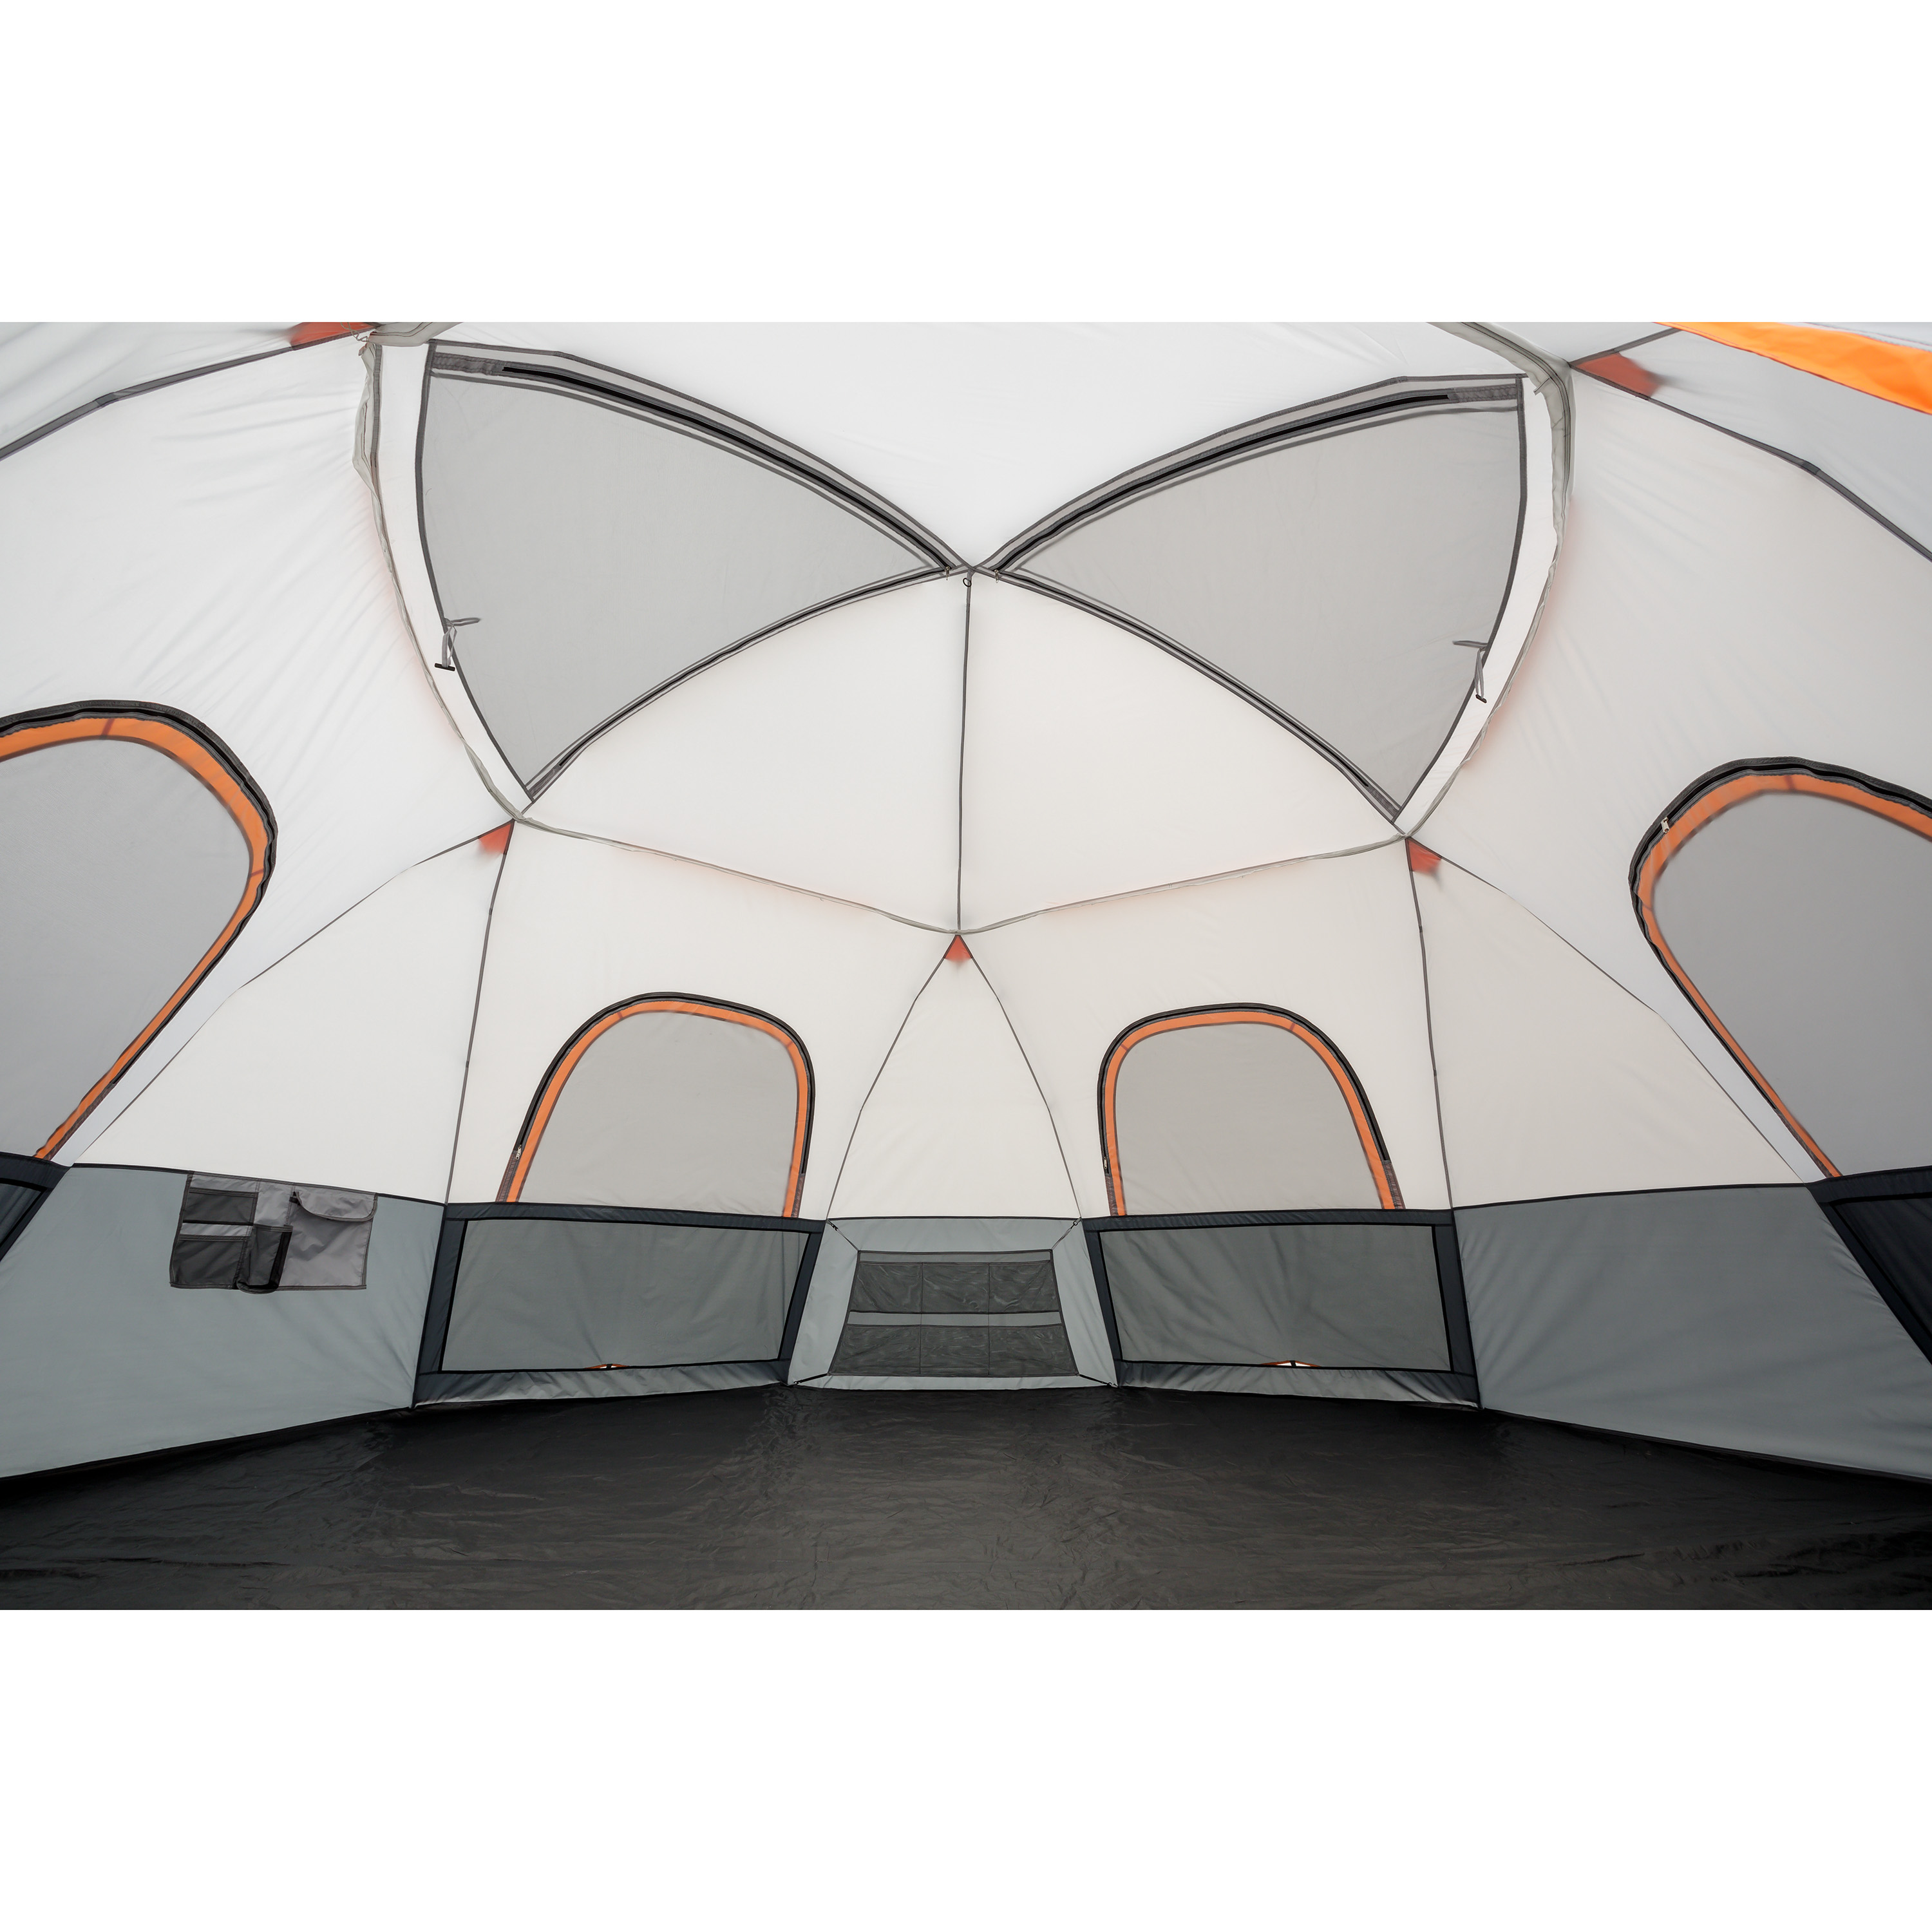 Ozark Trail 15’ x 15’ 9-Person Lighted Sphere Tent, 30.97 lbs - image 4 of 8